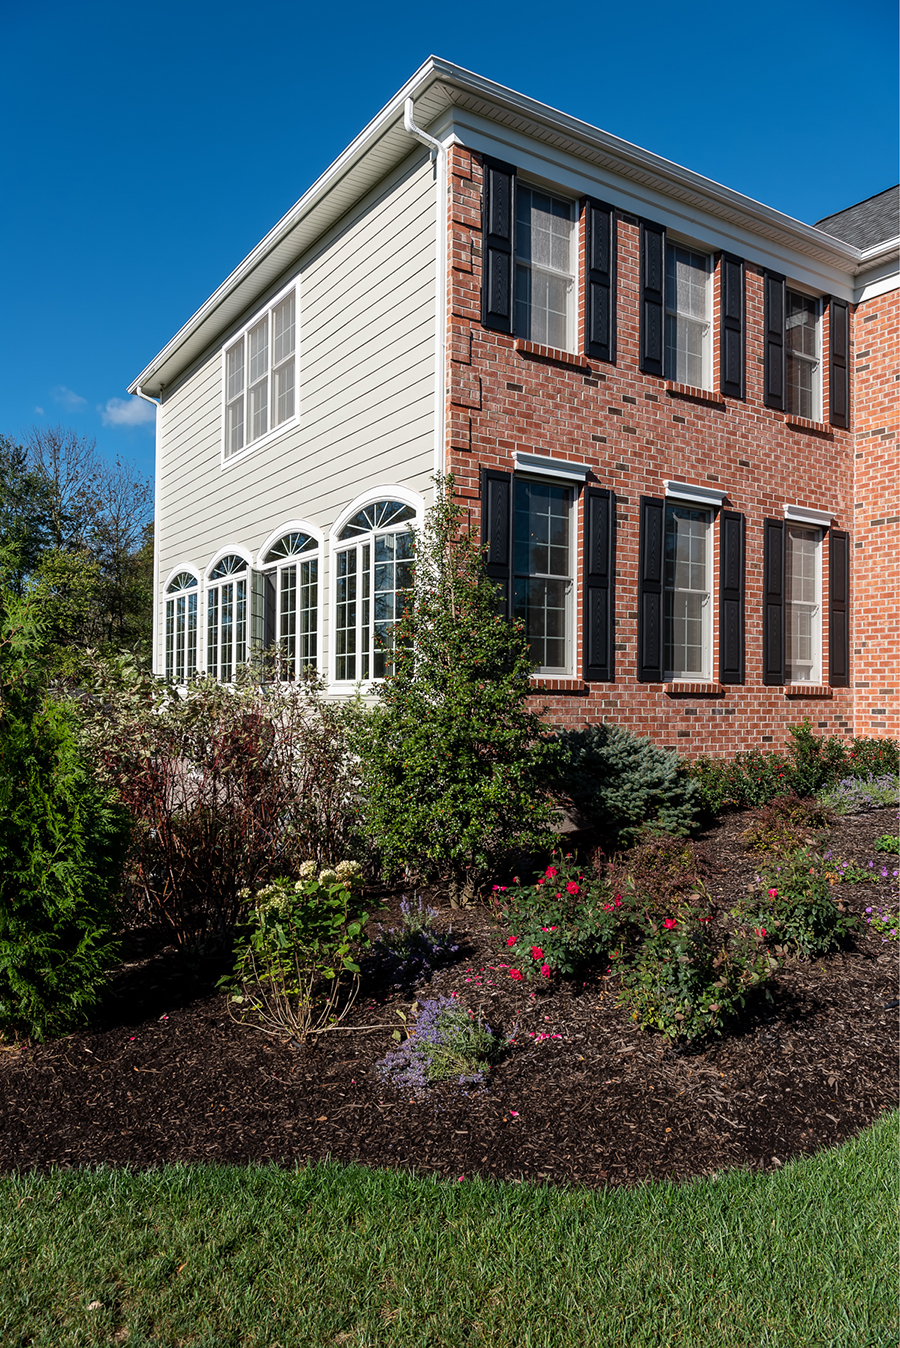 Clay's vinyl siding is great accent to the classic brick look